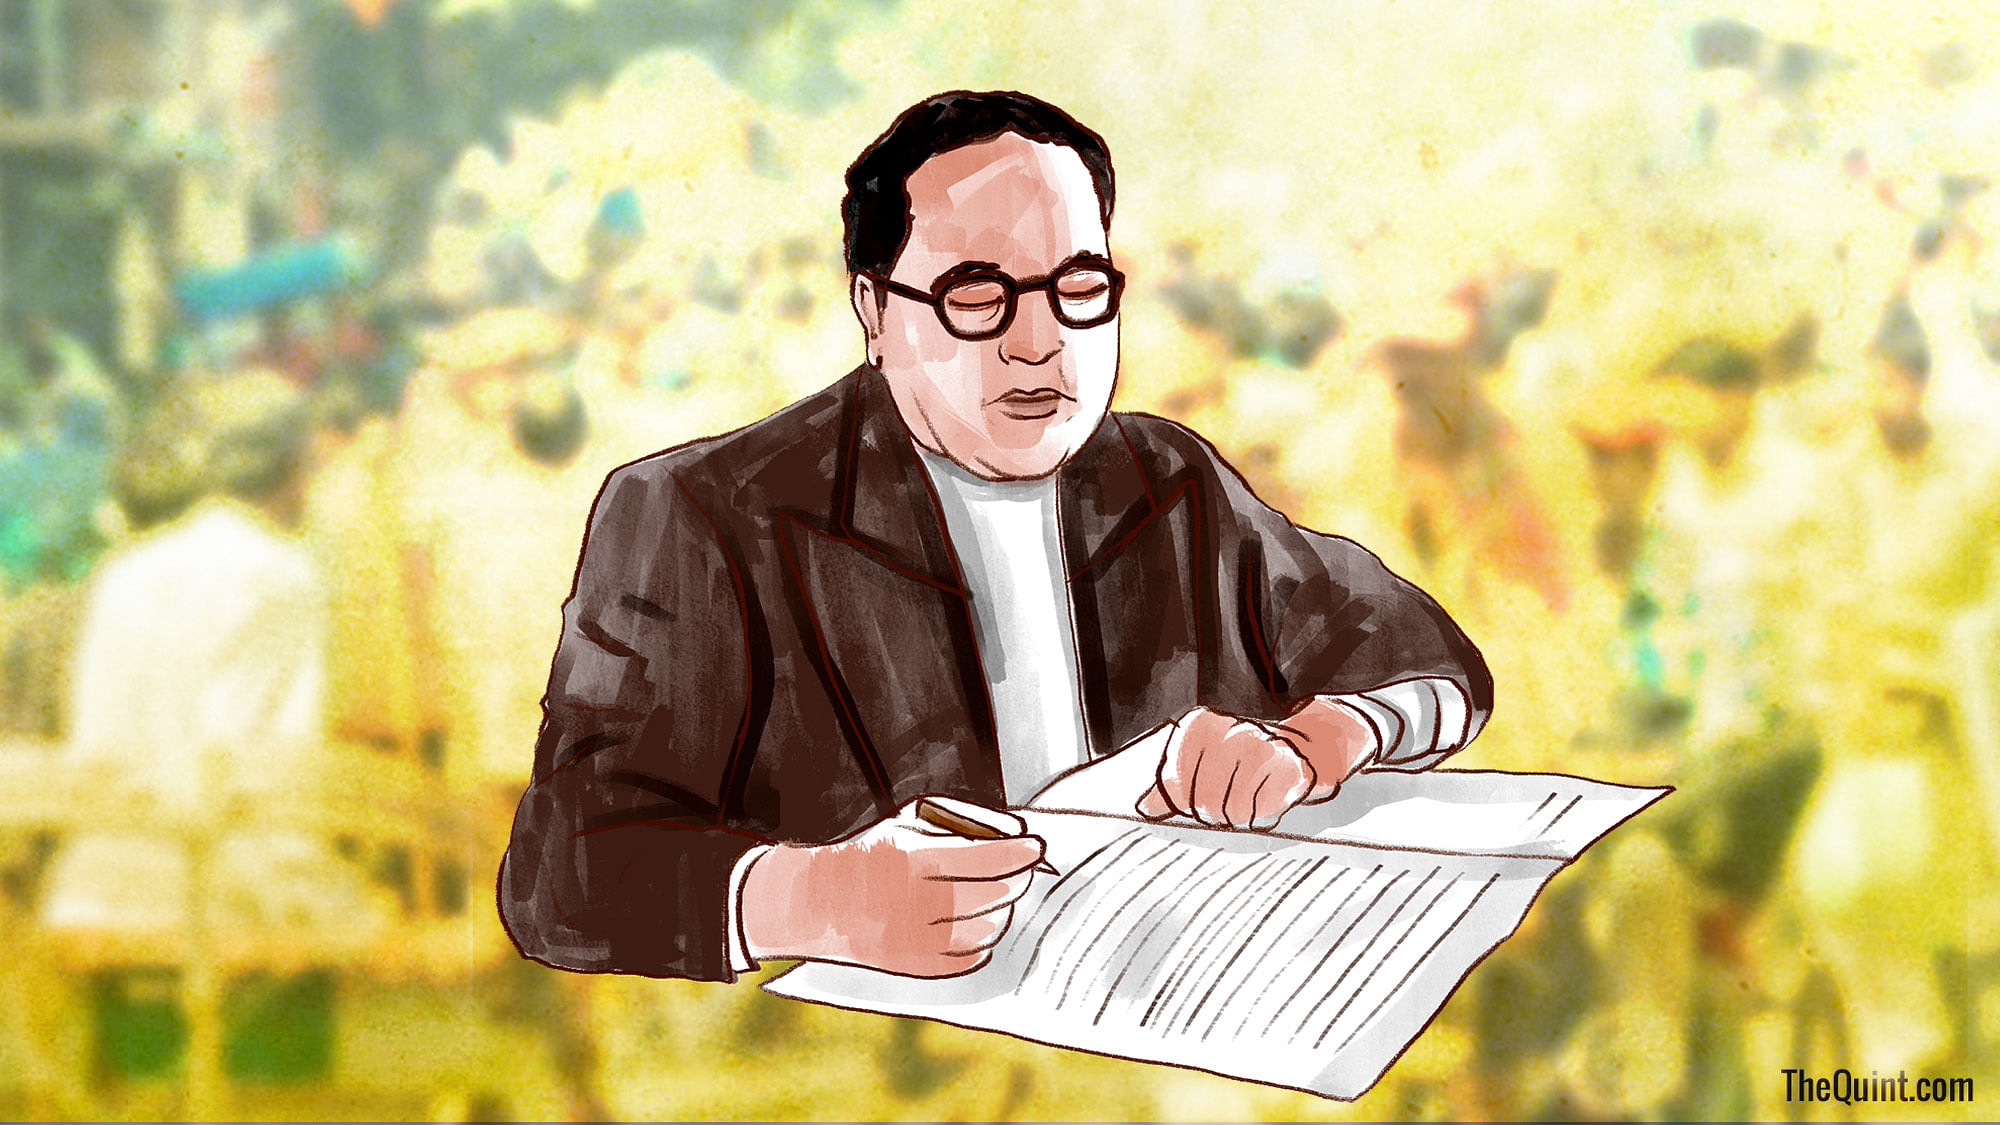 How to draw Dr BR Ambedkar step by step - YouTube